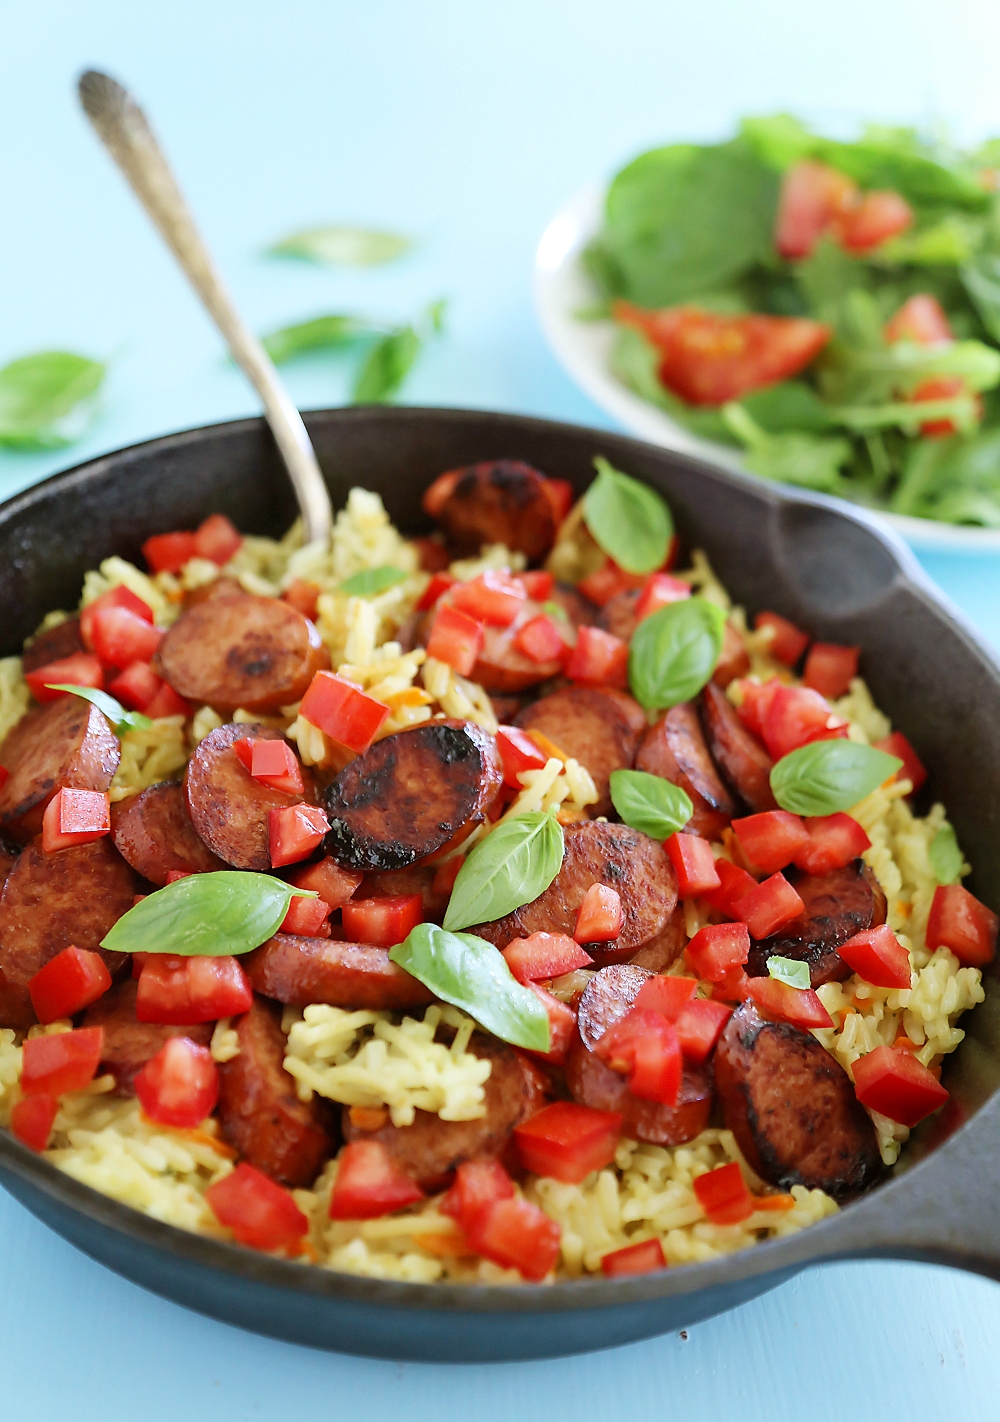 Bruschetta Chicken Sausage and Creamy Rice Skillet – Just 5 ingredients + 20 minutes. Try this fresh, healthy and hearty weeknight meal tonight! thecomfortofcooking.com